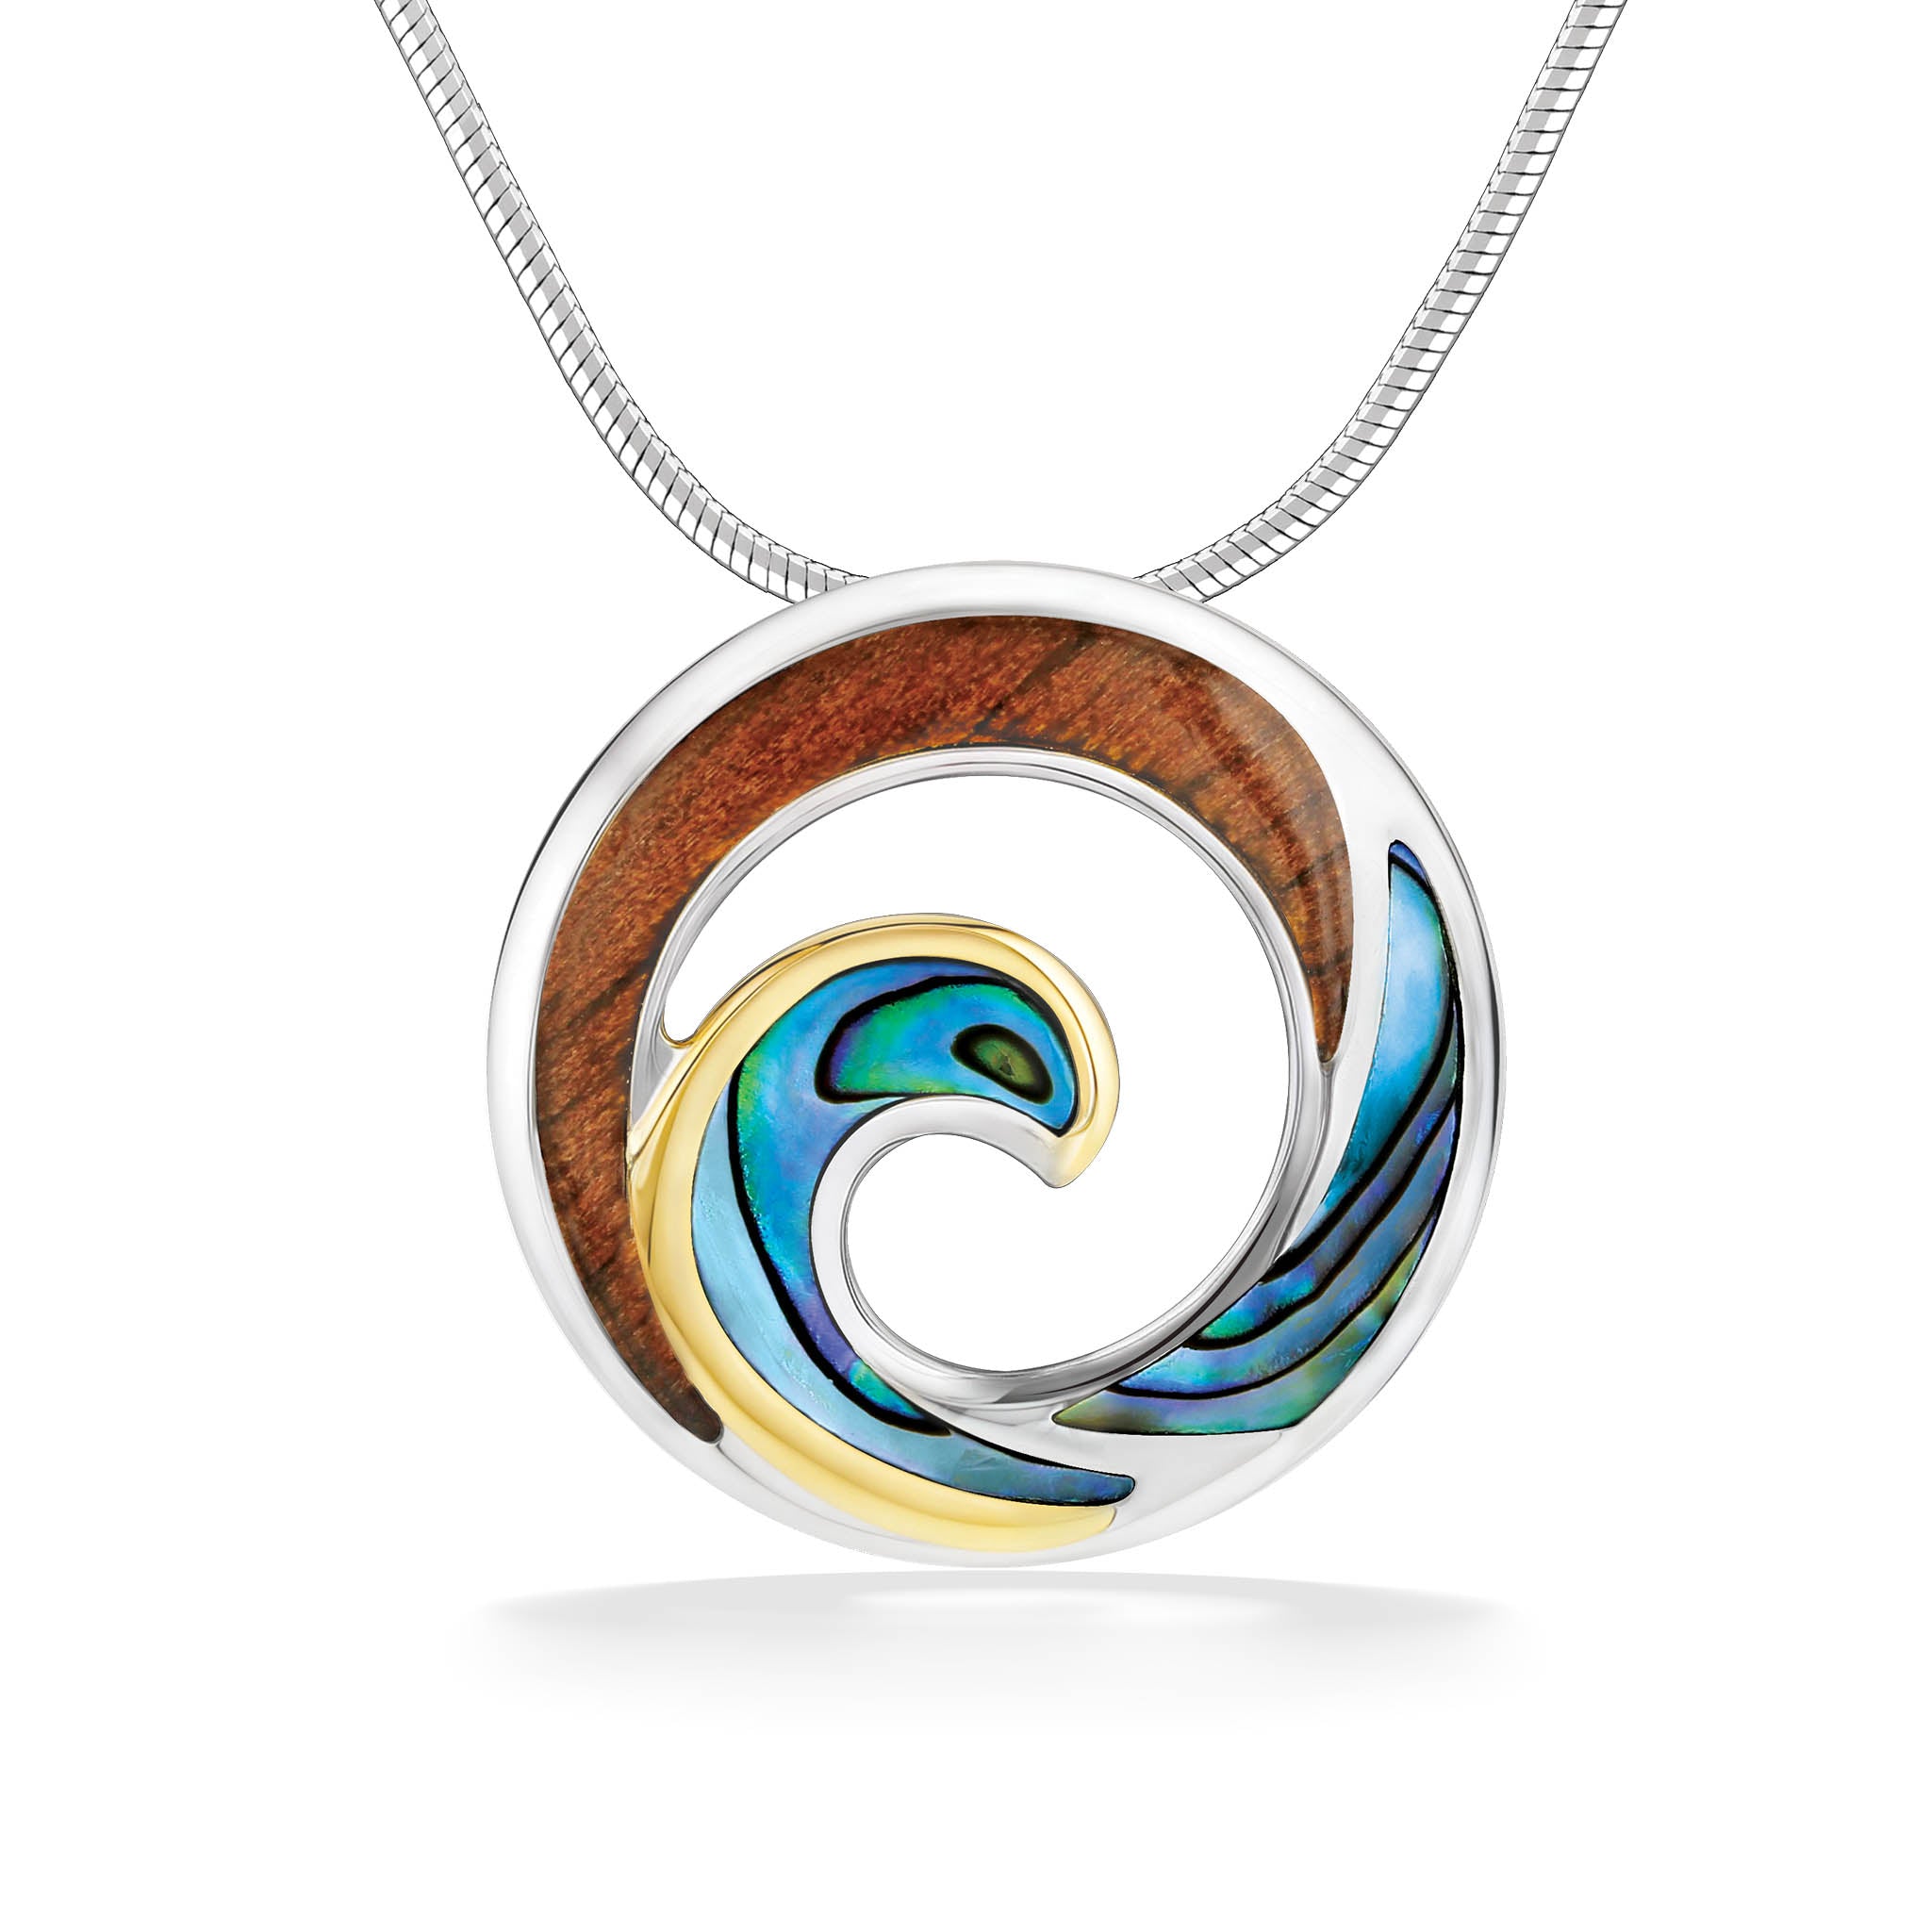 Buy Silver Wave Necklace, Surfer Necklace, Silver Necklace, Ocean Jewelry,  Surfer Jewelry Online in India - Etsy